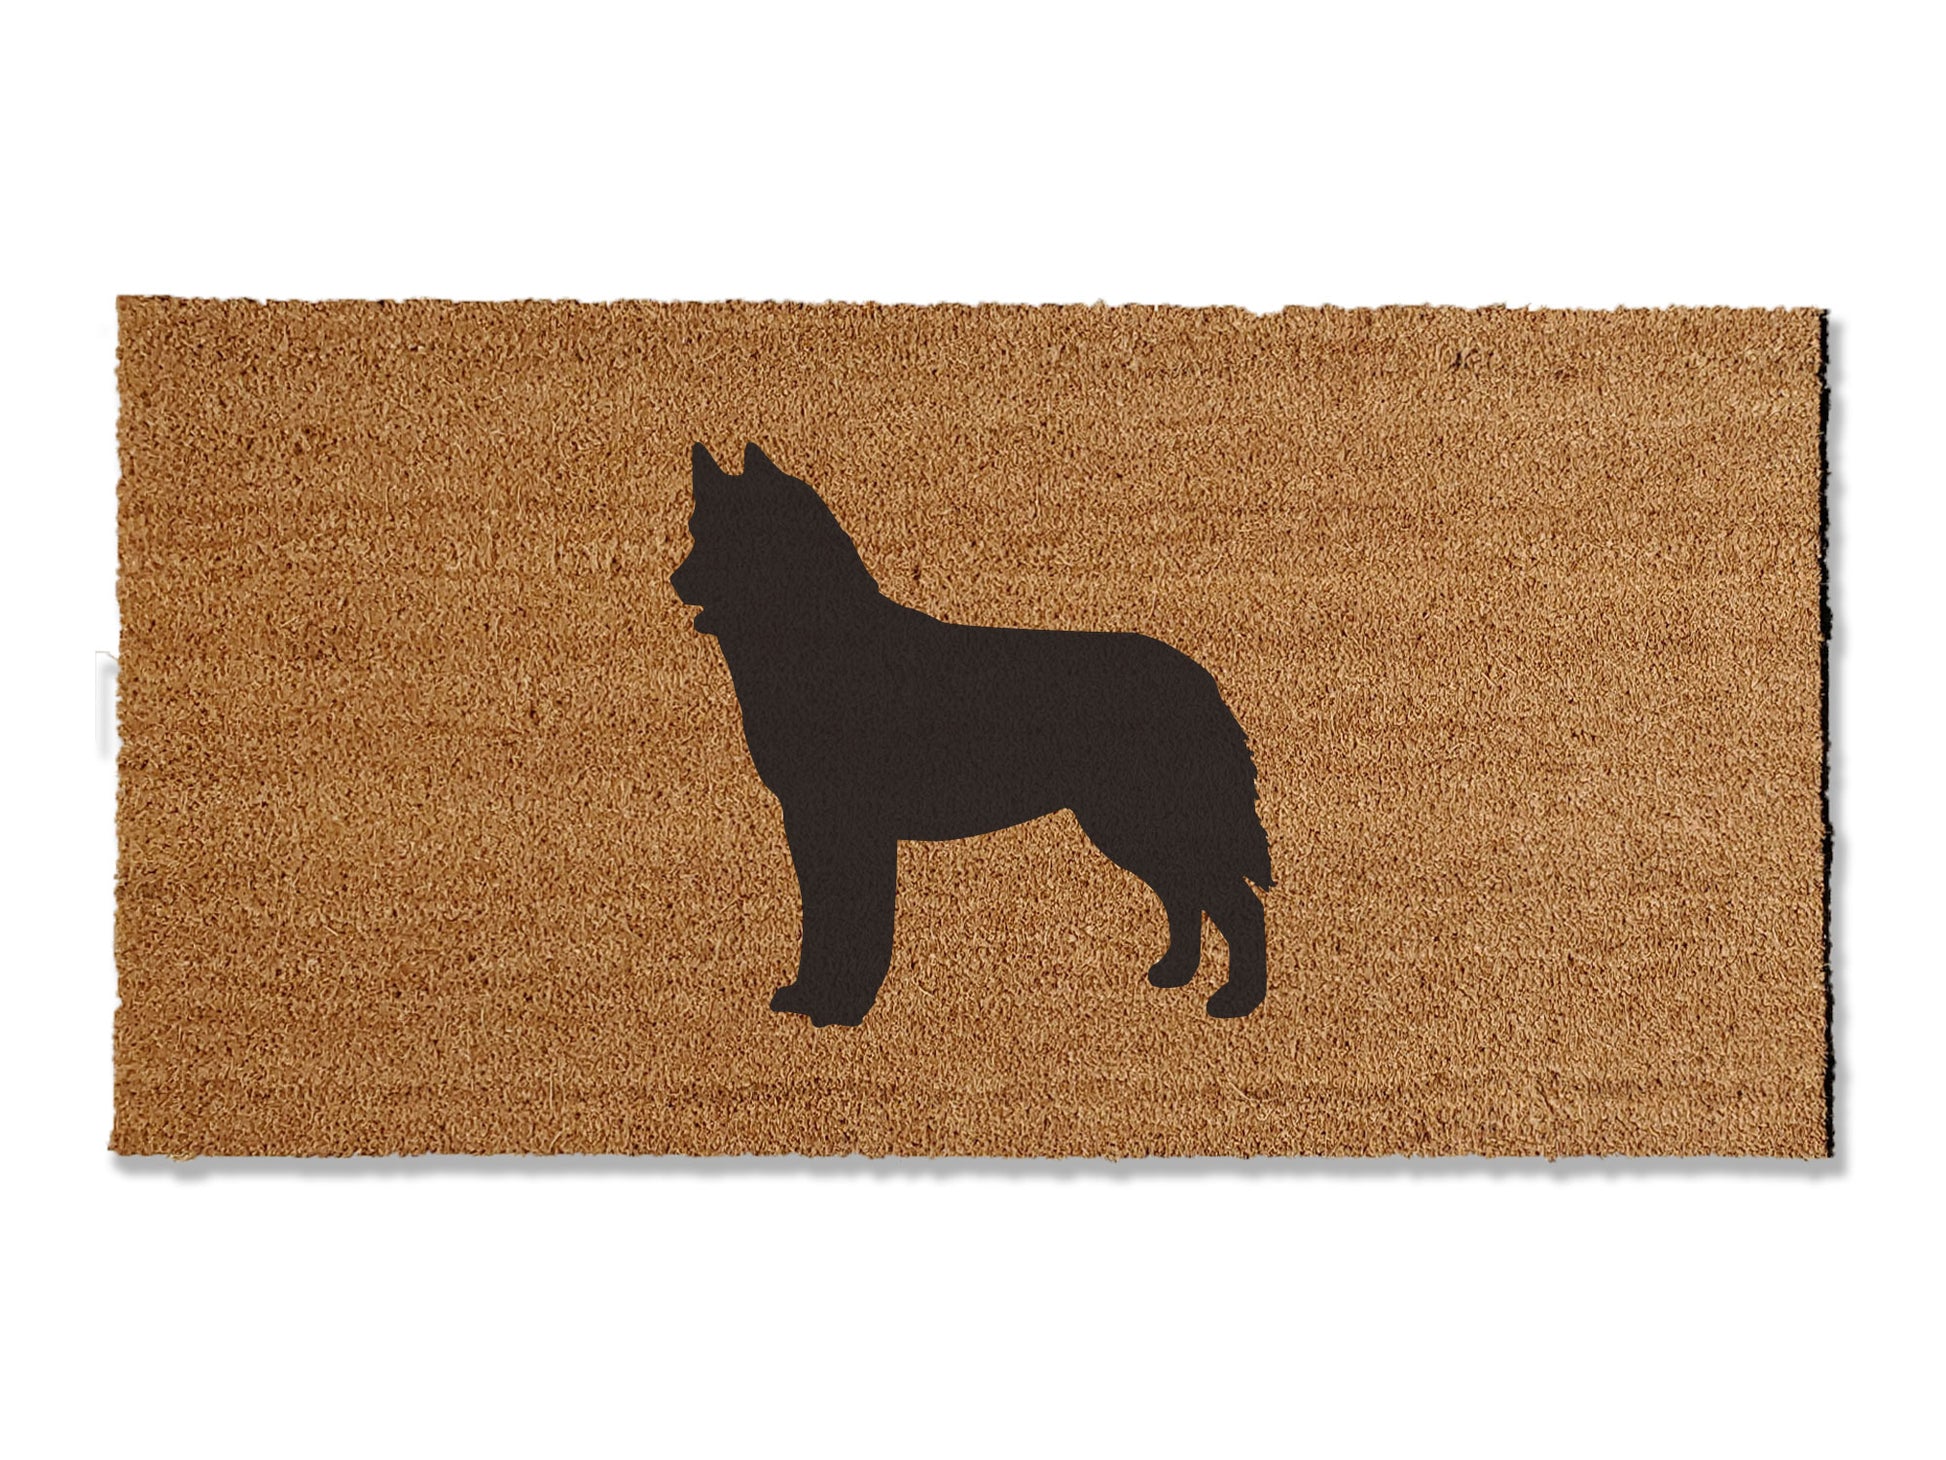 Welcome guests with our coir welcome doormat, featuring a charming Husky Dog design. Available in multiple sizes, this is the perfect gift for Husky lovers, adding a touch of canine charm that effortlessly spruces up your entryway.